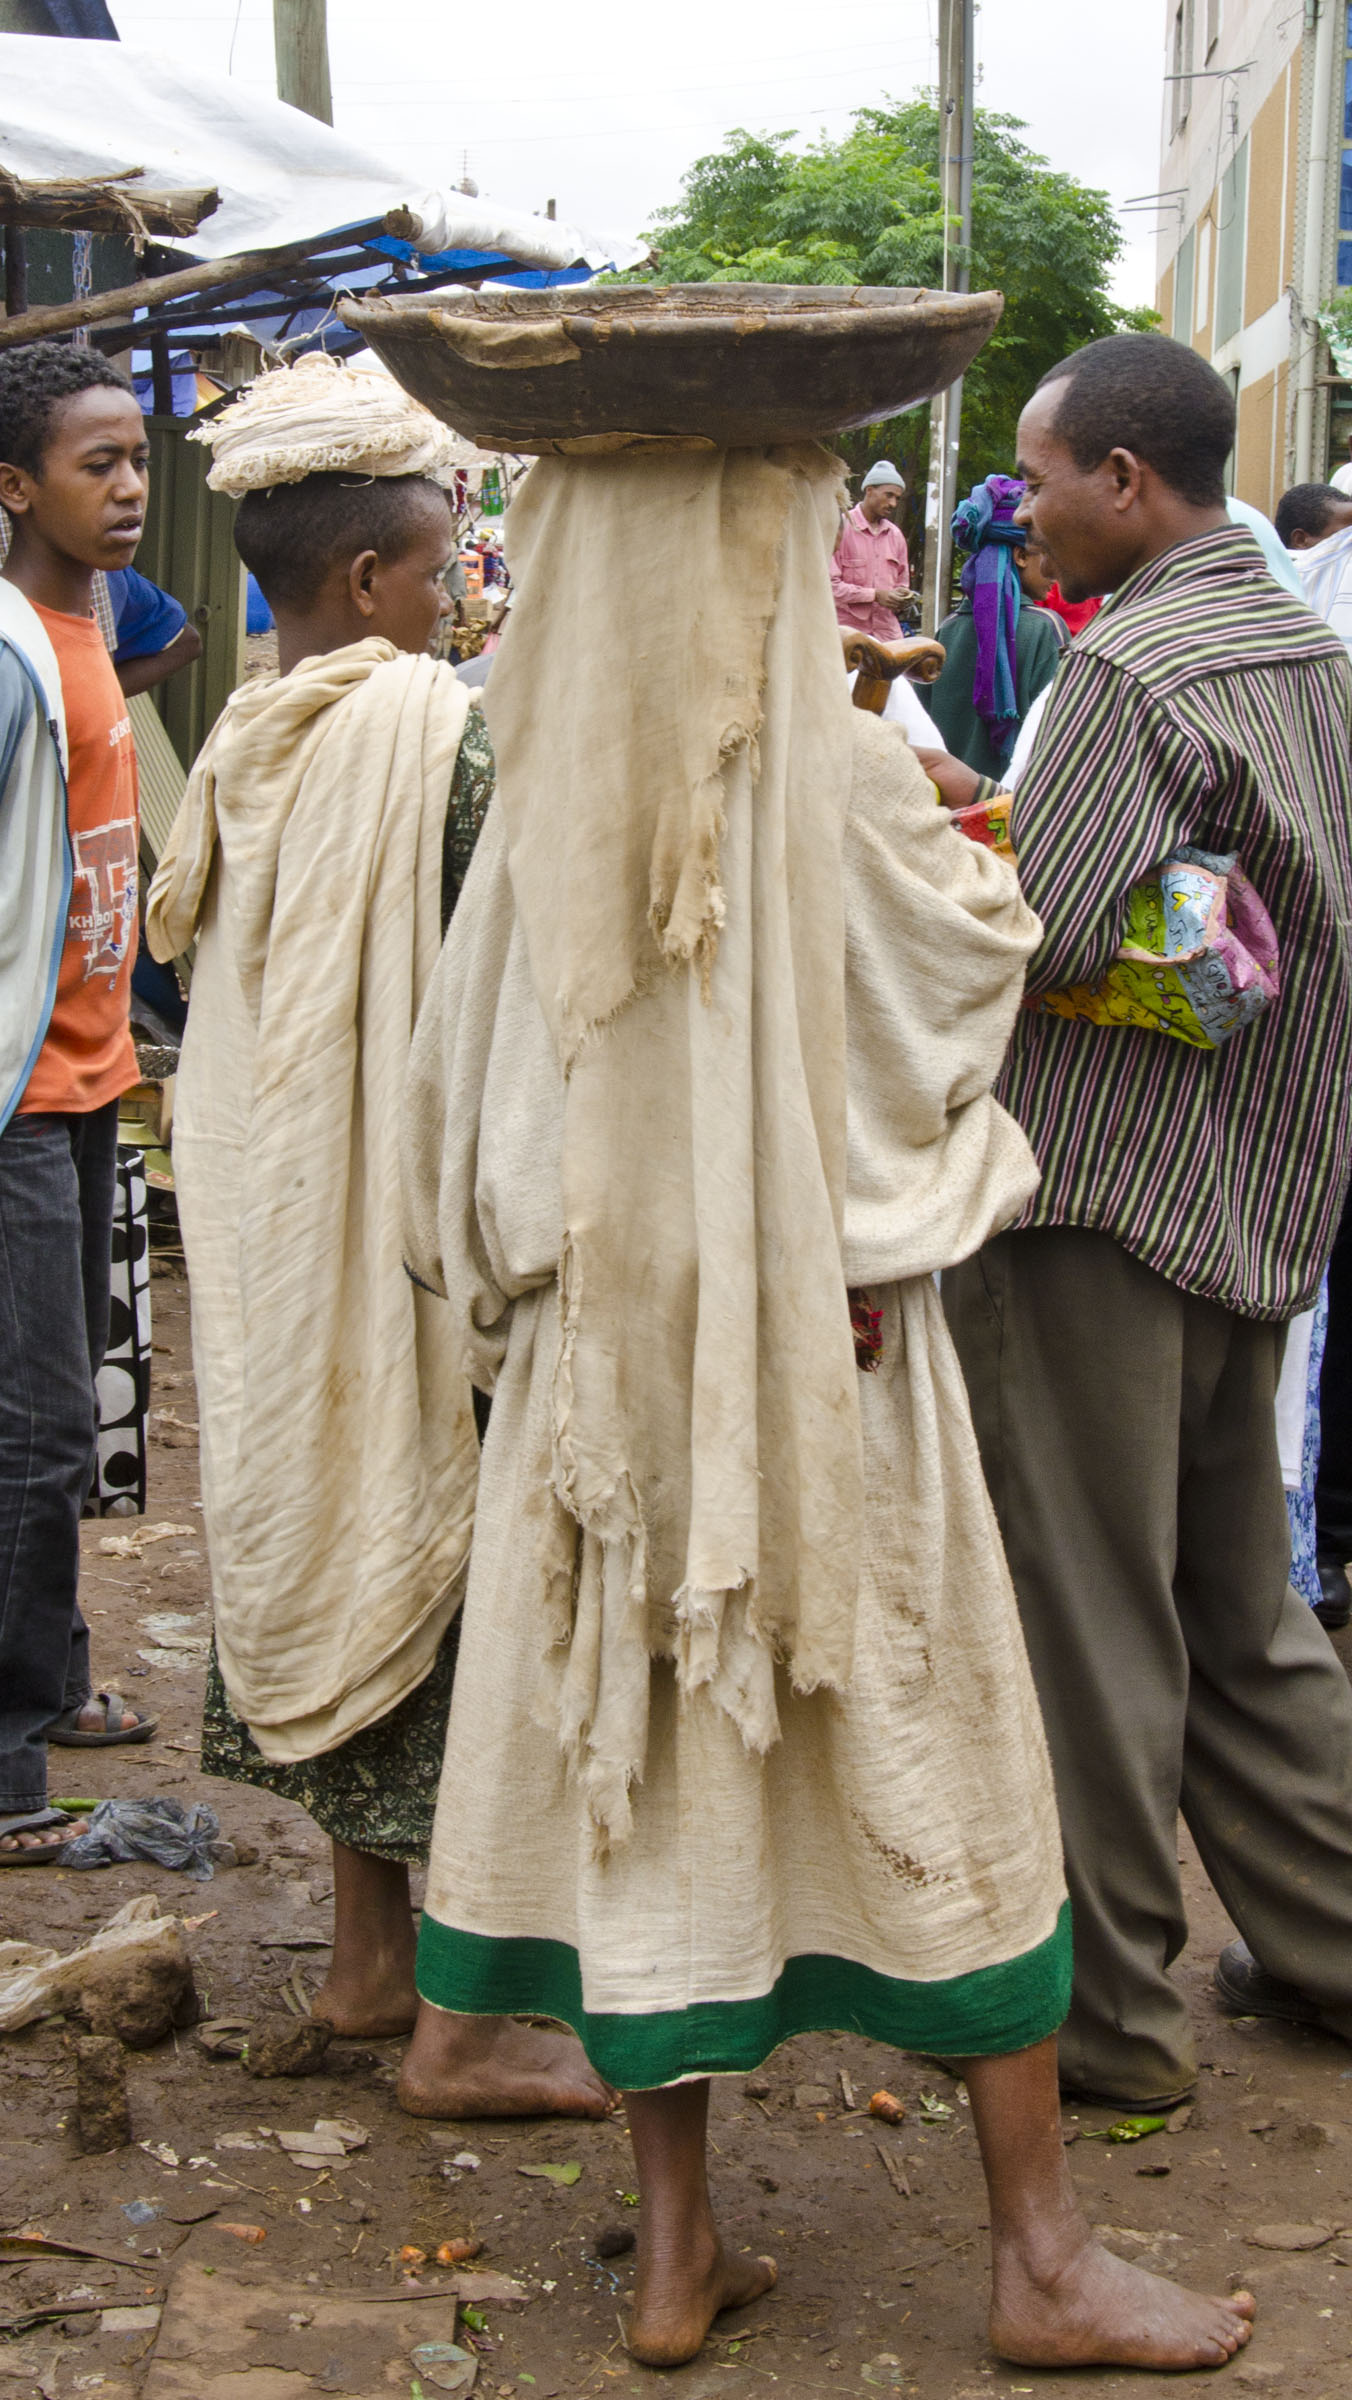 Ethiopian woman carrying wooden bowl on head